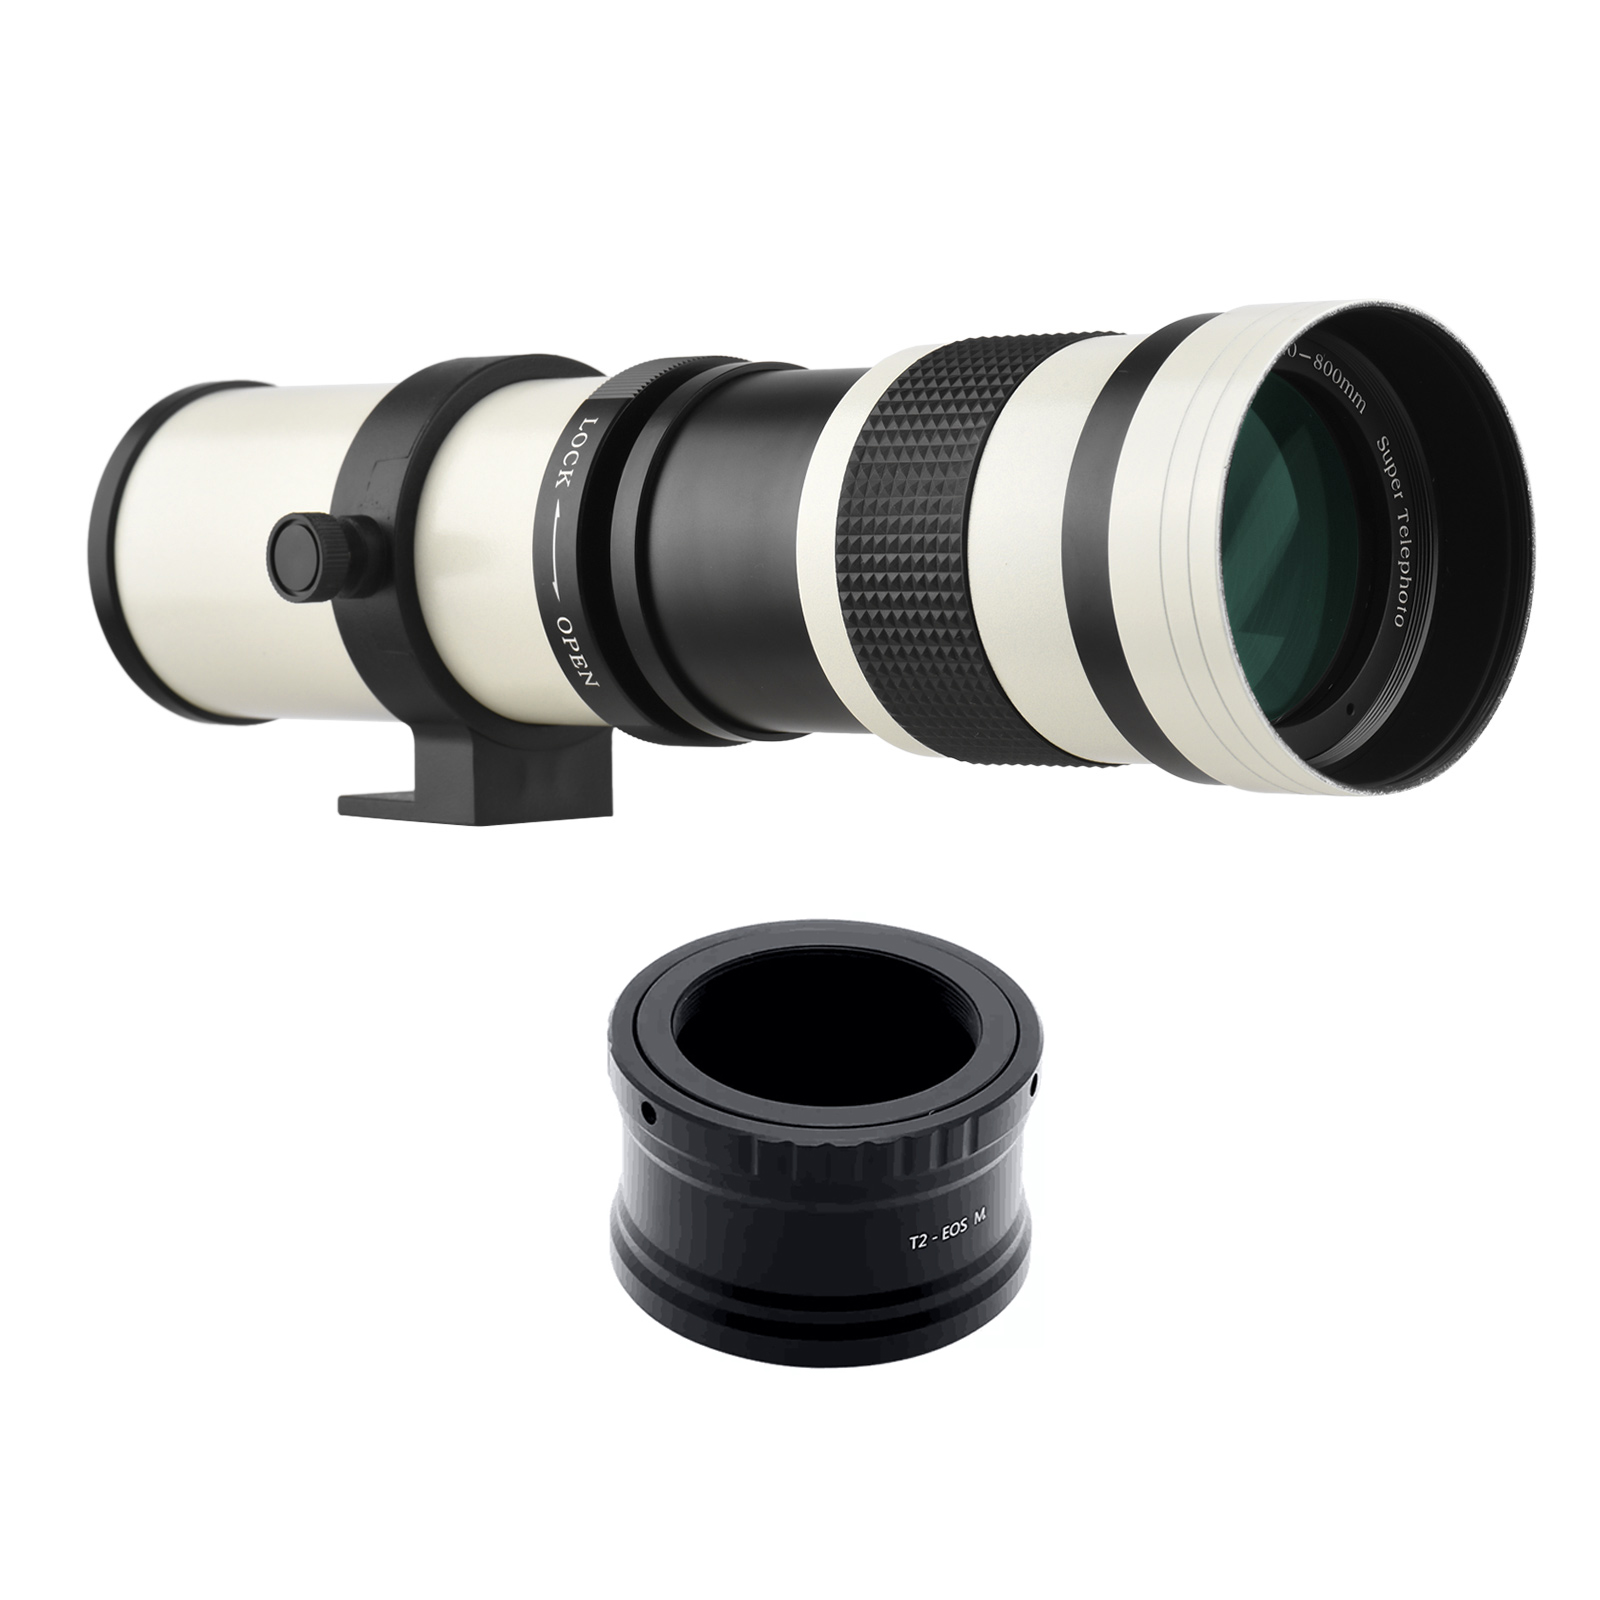 Walmeck  MF Super Telephoto Zoom Lens F8.3-16 420-800mm T2 Mount with M-mount Adapter Ring 14 Thread Replacement for  M M2  M5 M6 Mark II  M50 M100 M200 Cameras - image 1 of 7